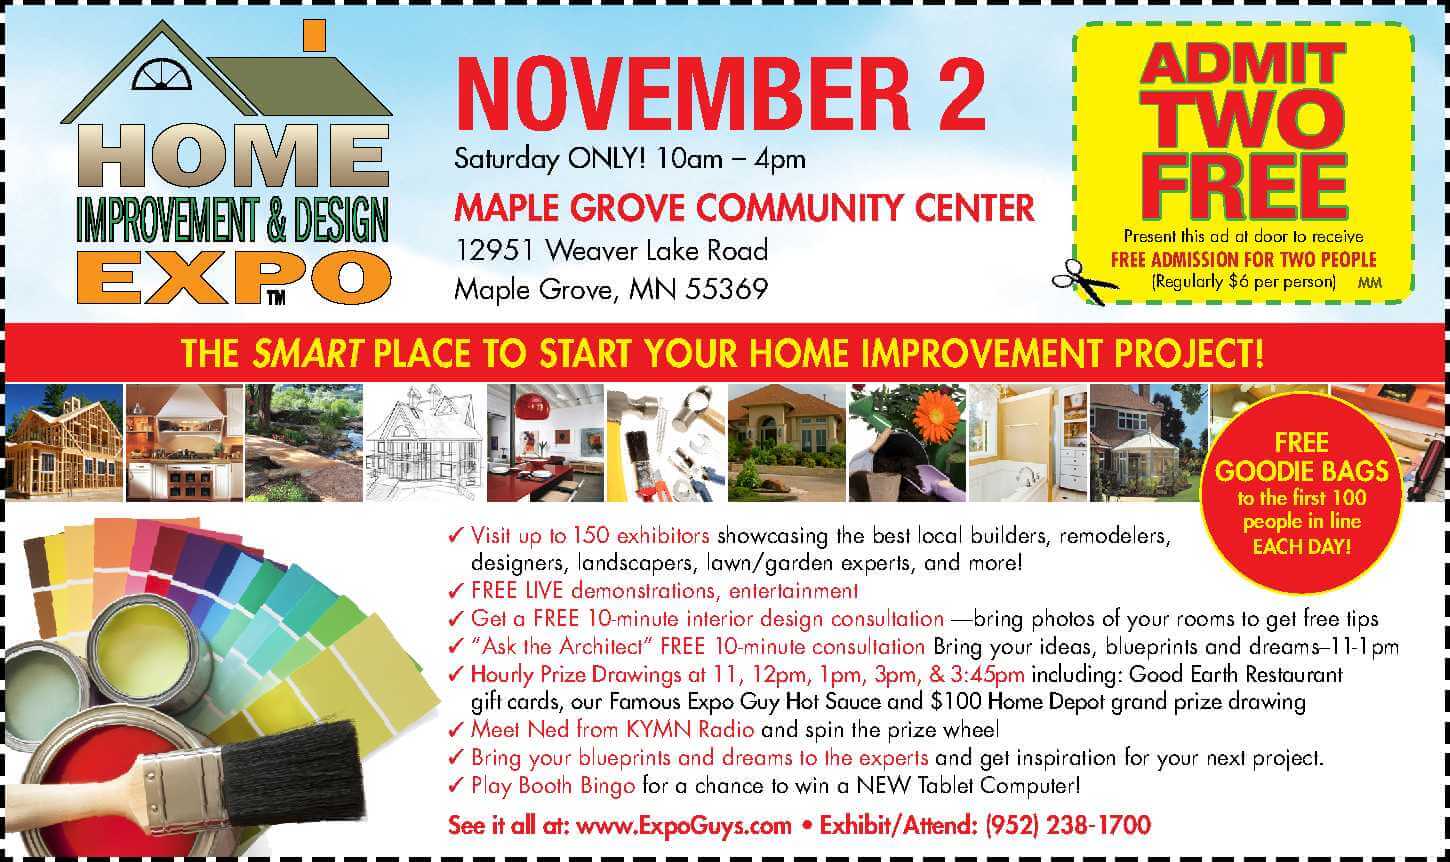 Maple Grove Home Improvement and Design Expo – Saturday, November 2nd!